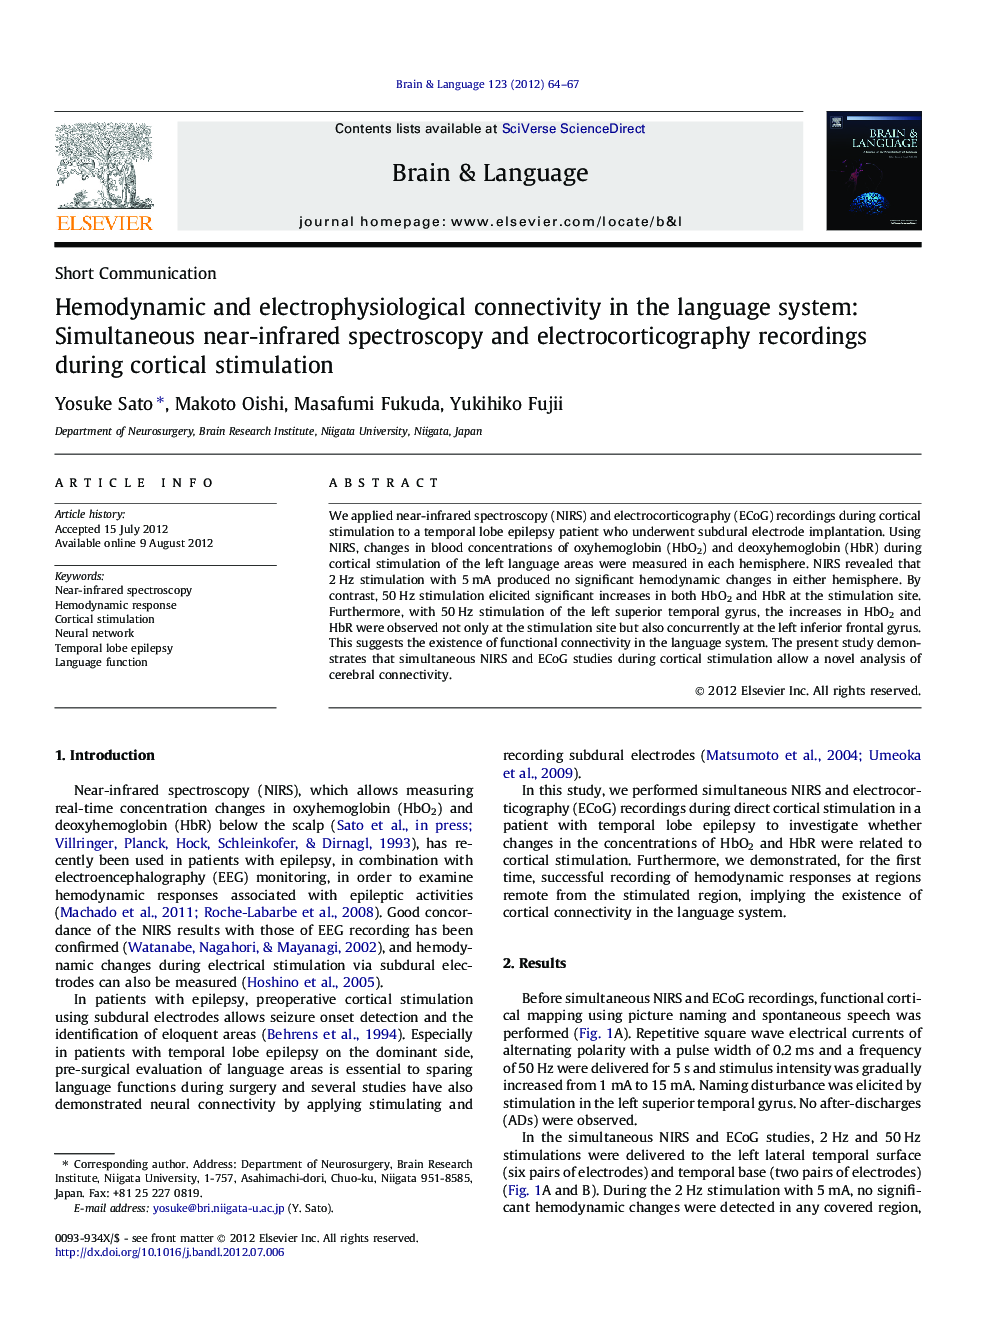 Hemodynamic and electrophysiological connectivity in the language system: Simultaneous near-infrared spectroscopy and electrocorticography recordings during cortical stimulation